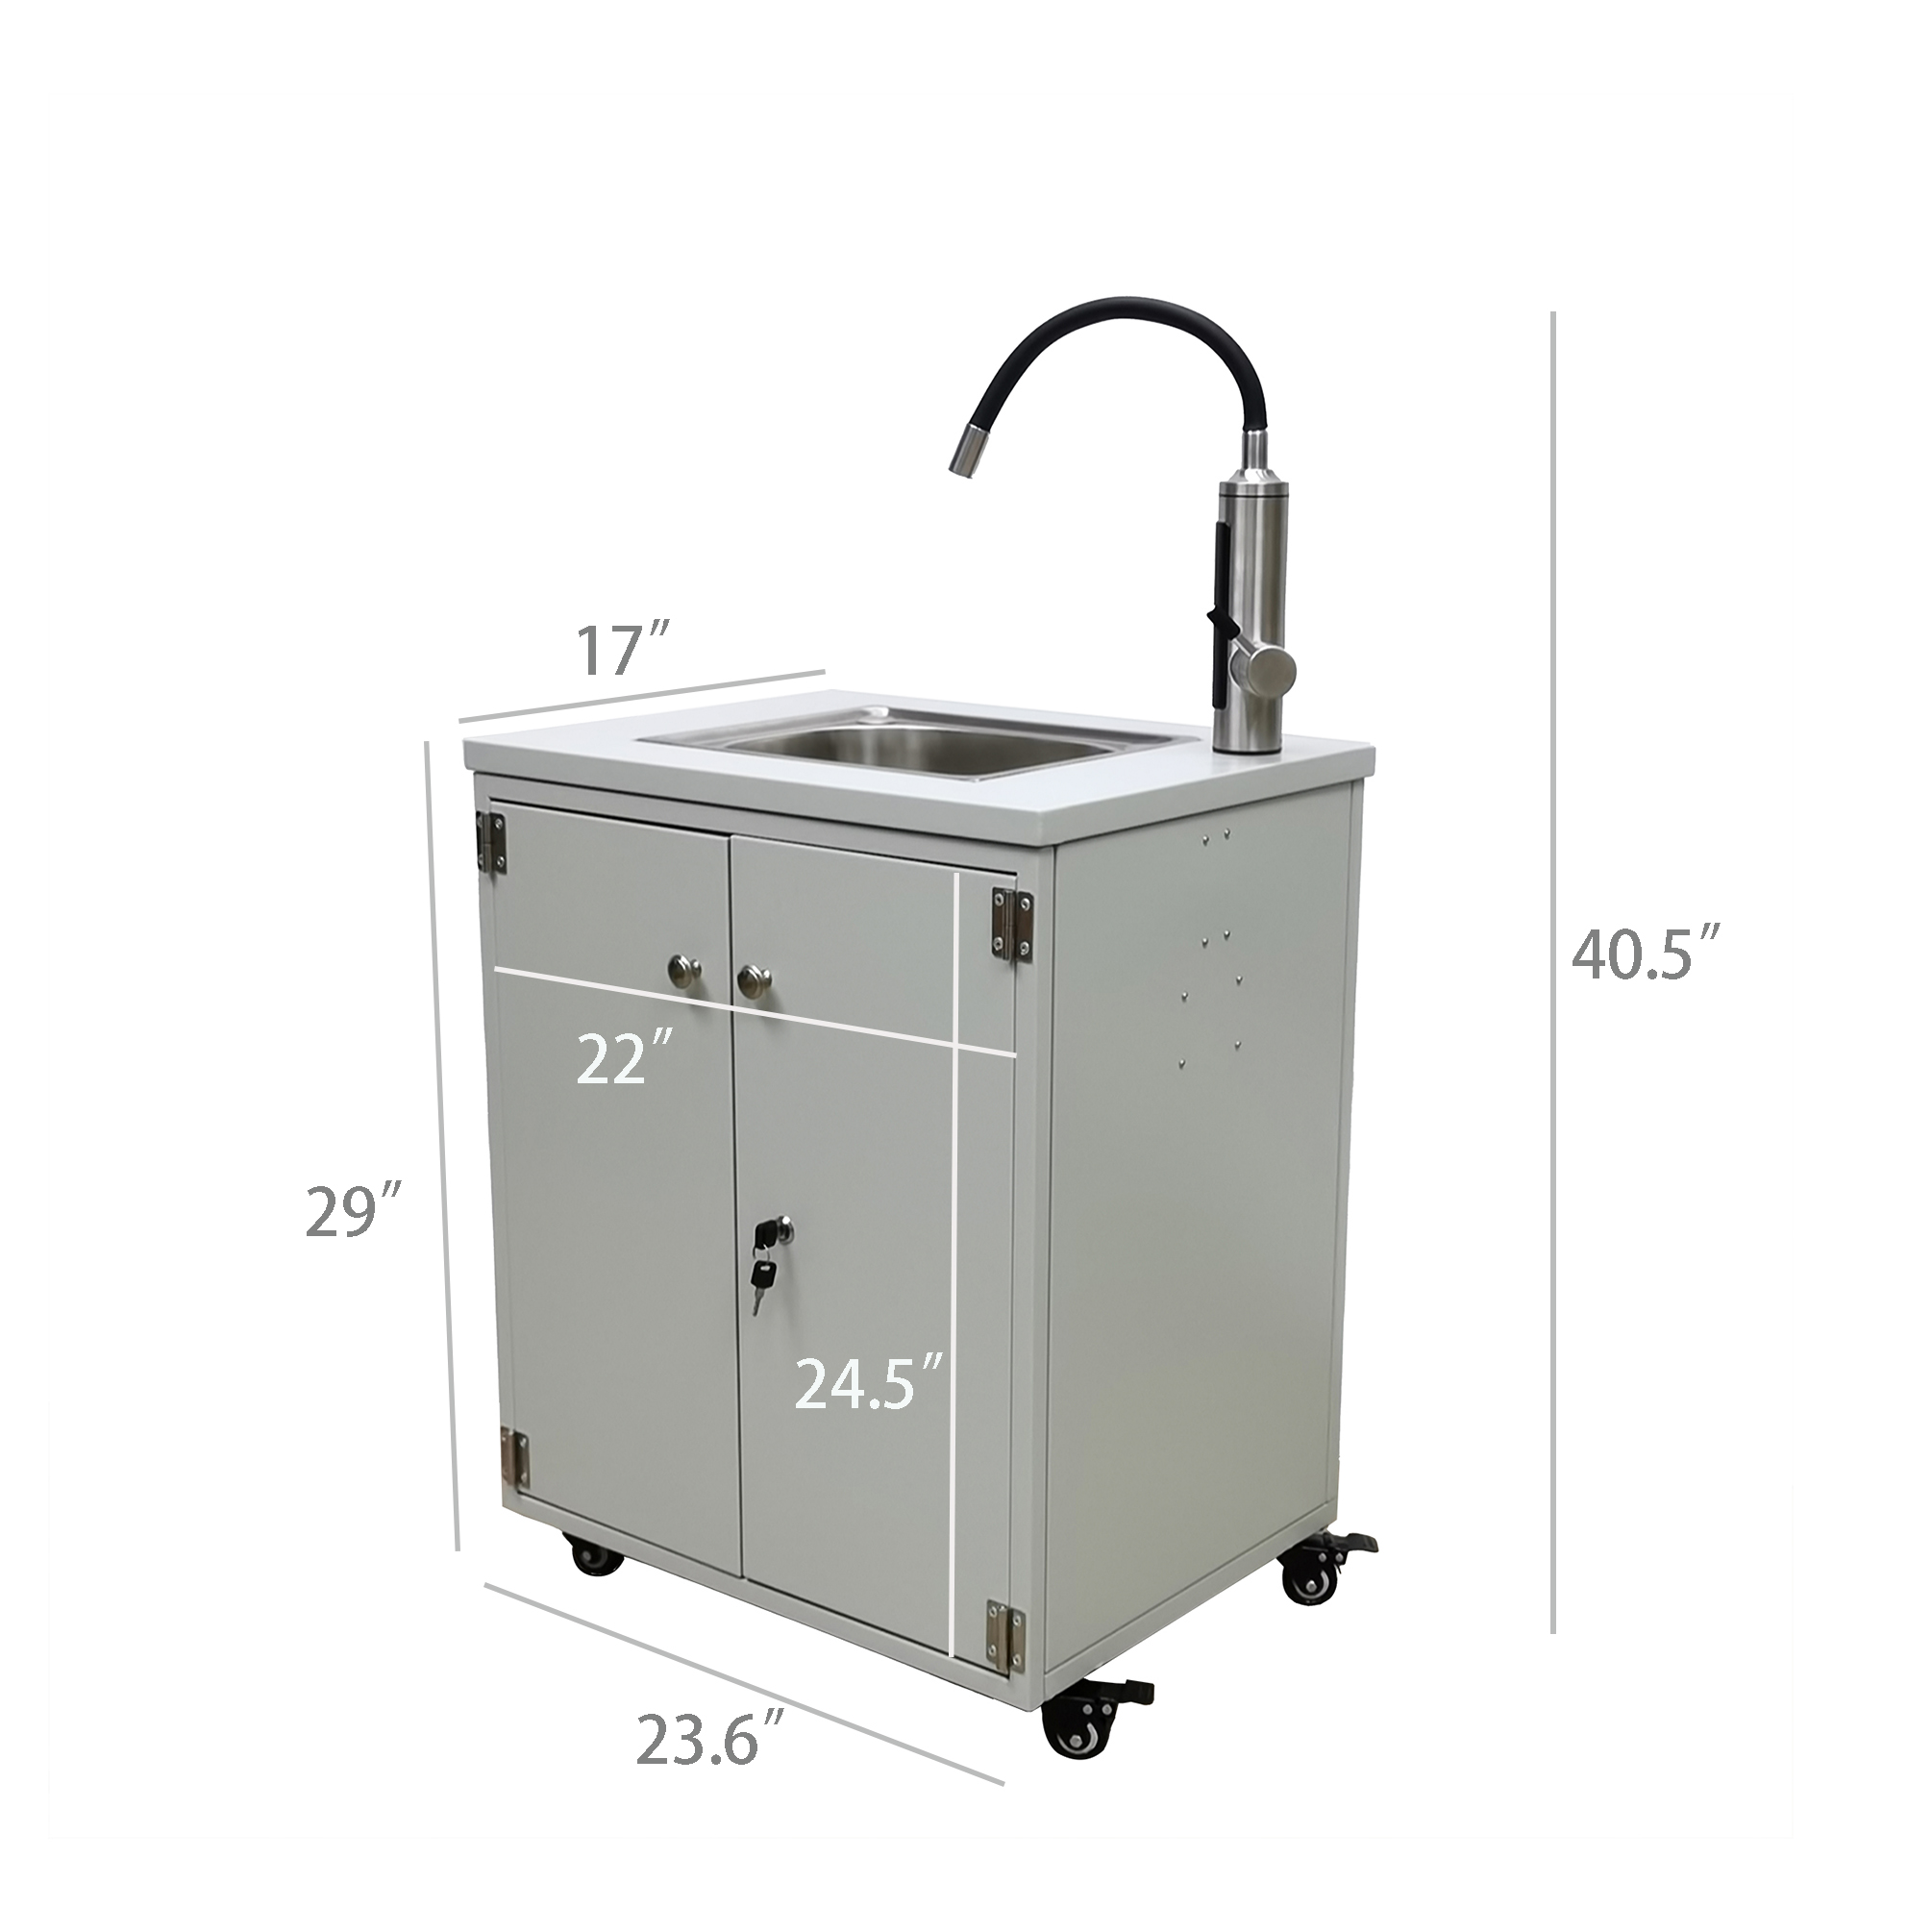 FixtureDisplays 24 X 18.3 X 39" Portable Mobile Sink Steel Cabinet Hot Water Digital Temperature Control Self Contained Hand Wash Station Food